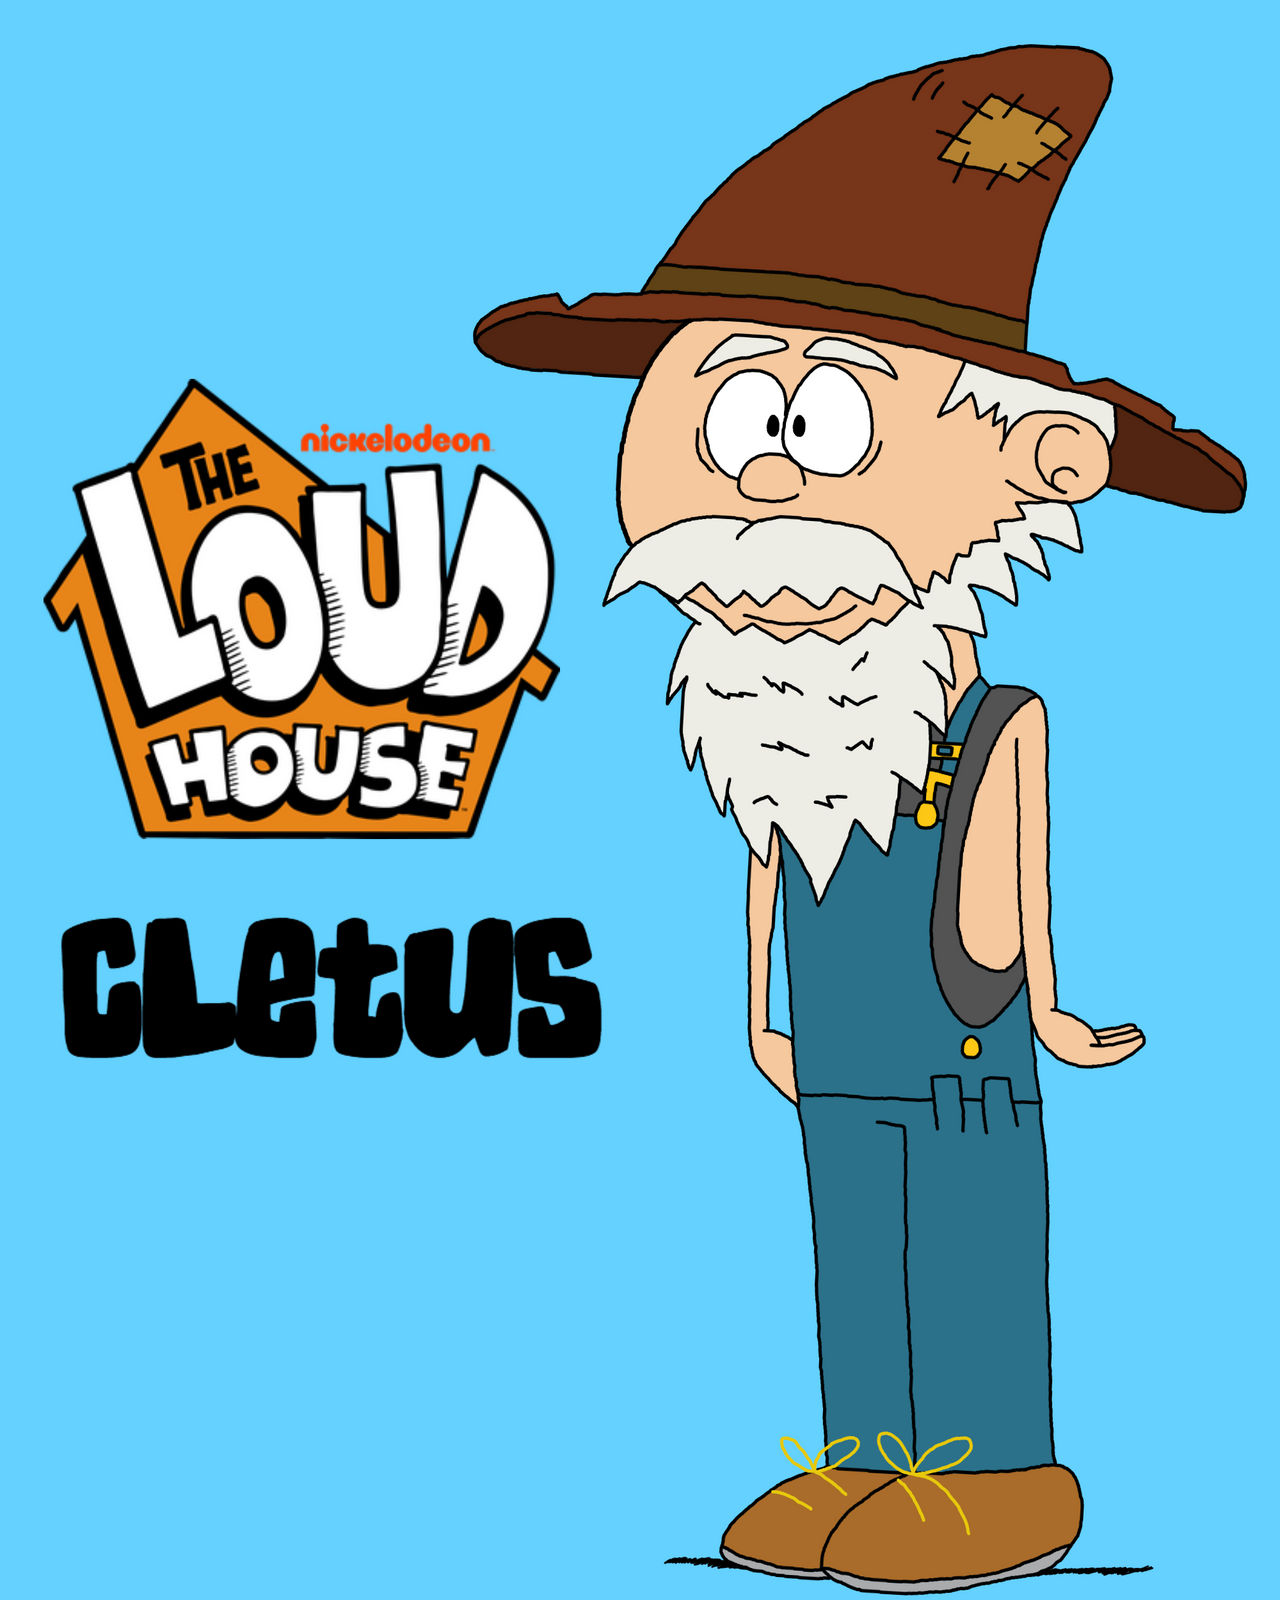 The Loud House' Style: Papa Louie by josias0303 on DeviantArt